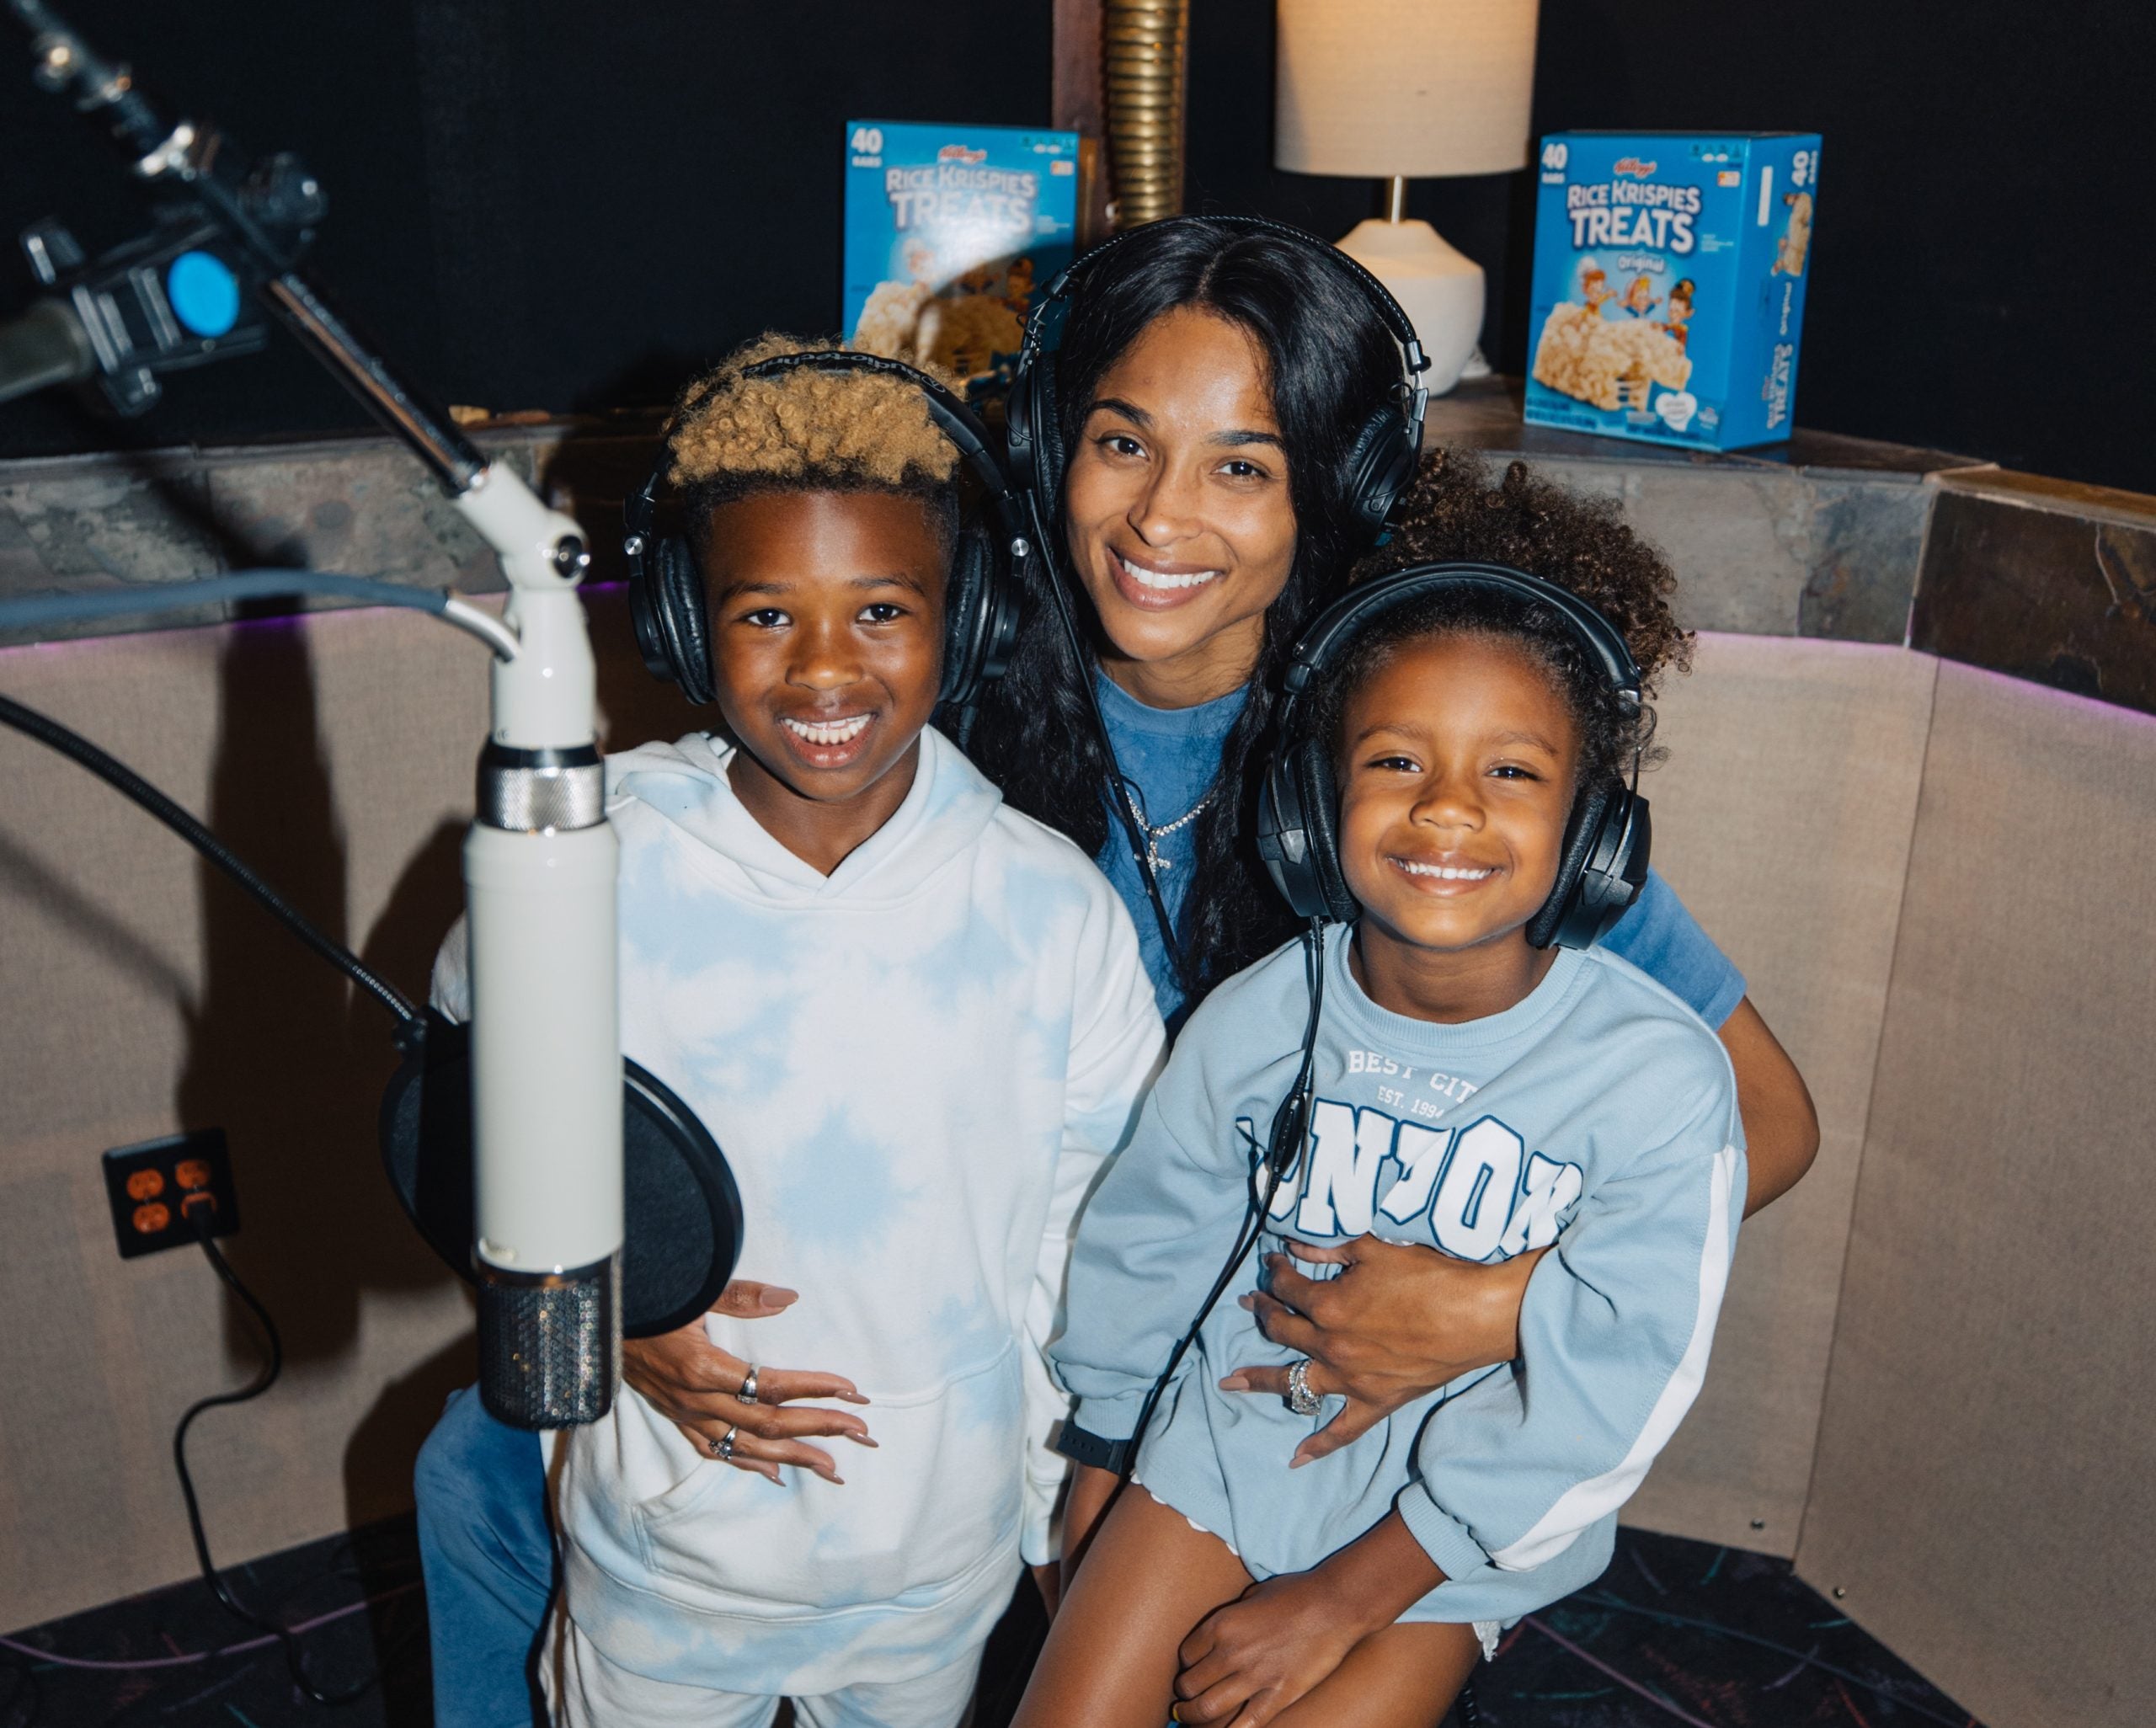 Ciara Has An Unexpected Collaborator For Her New Song 'Treat': Her Kids